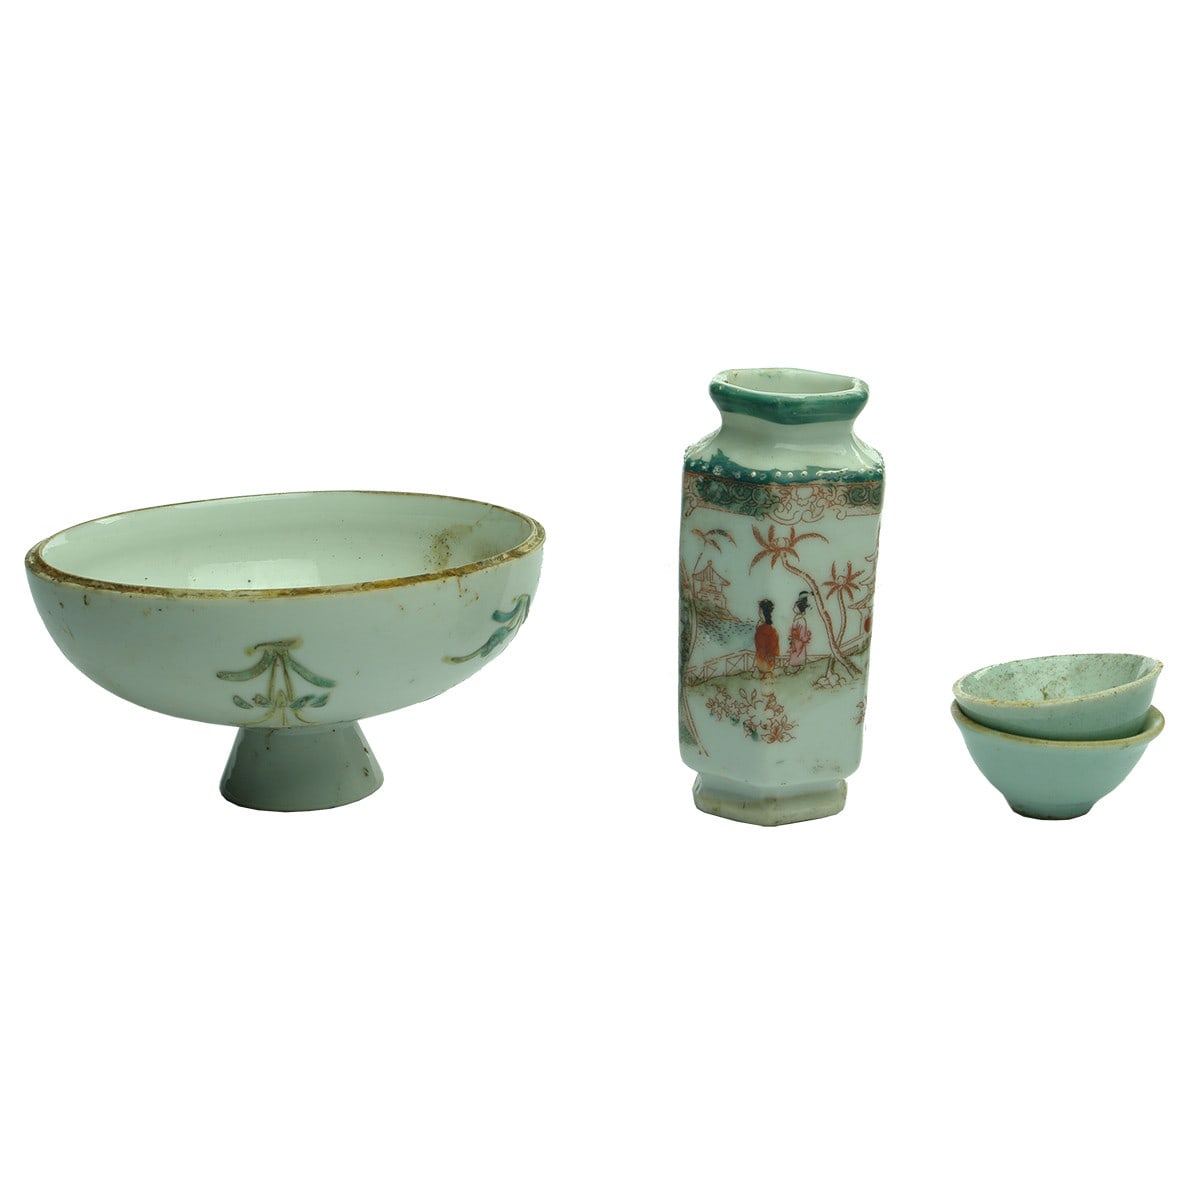 4 pieces of Chinese or Chinese like porcelain. 2 small cups, vase and bowl.